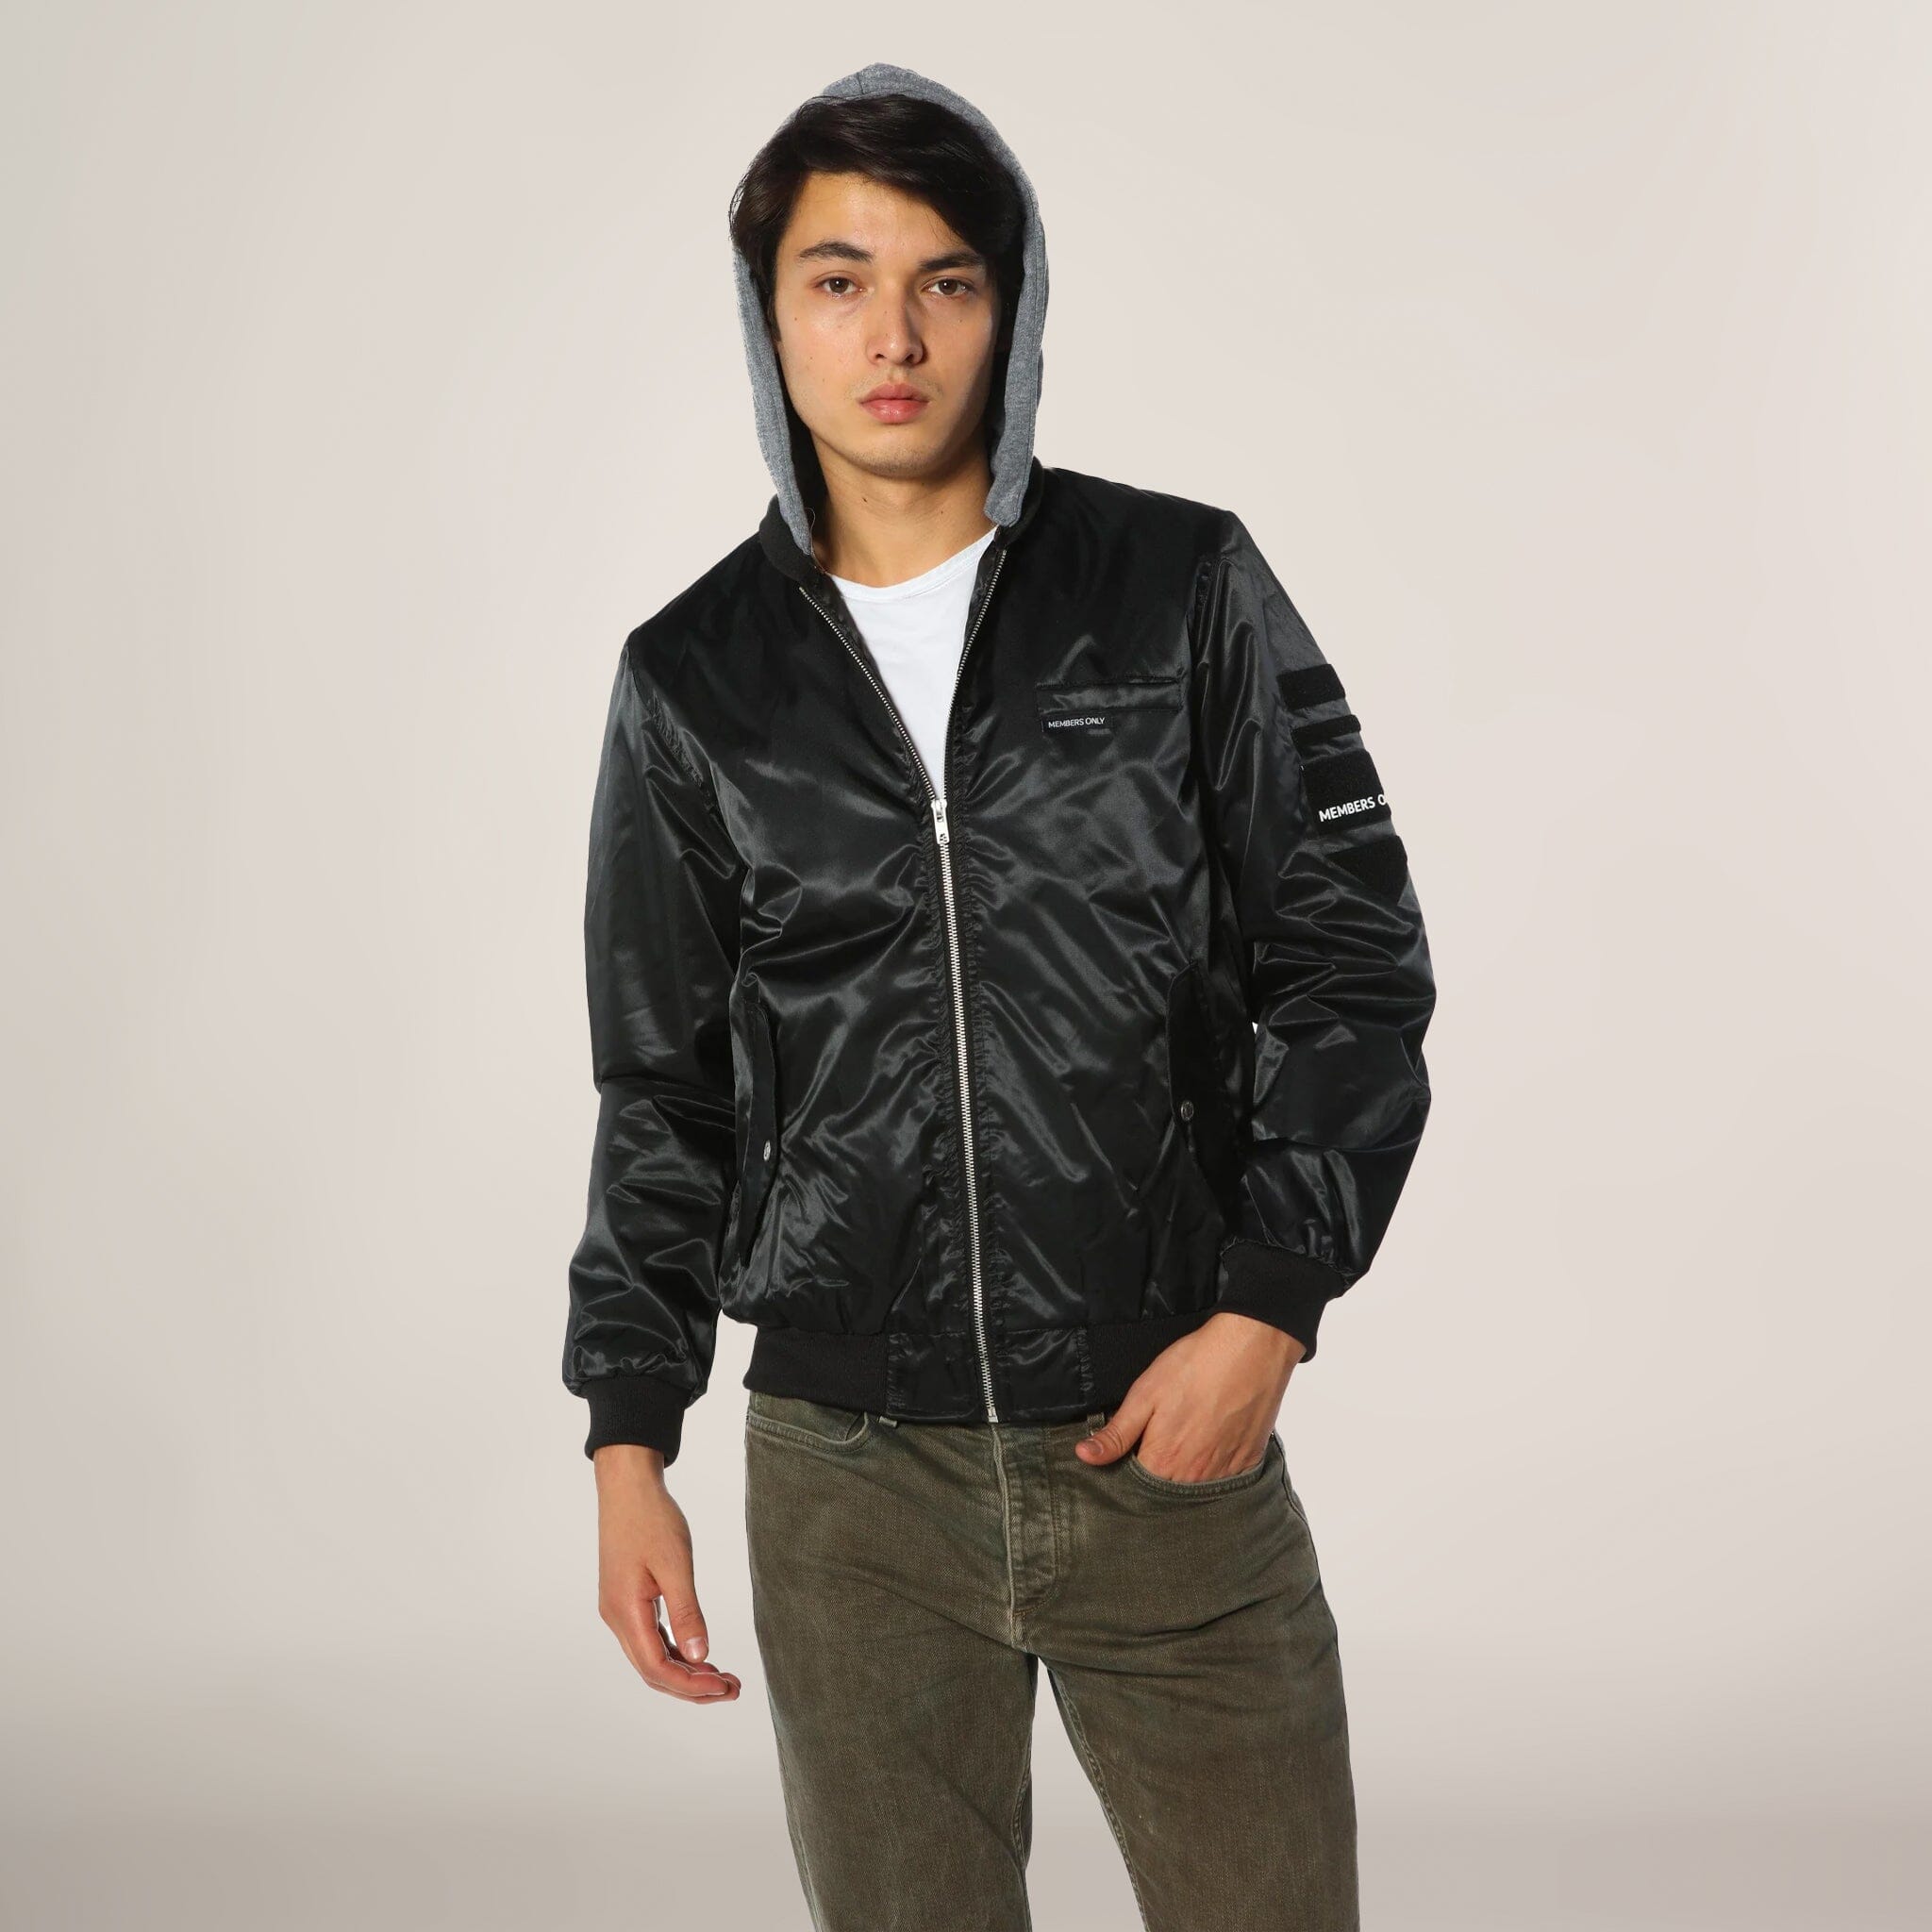 Men's Flight Satin Twill Hooded Jacket Bomber Jacket Members Only Official 